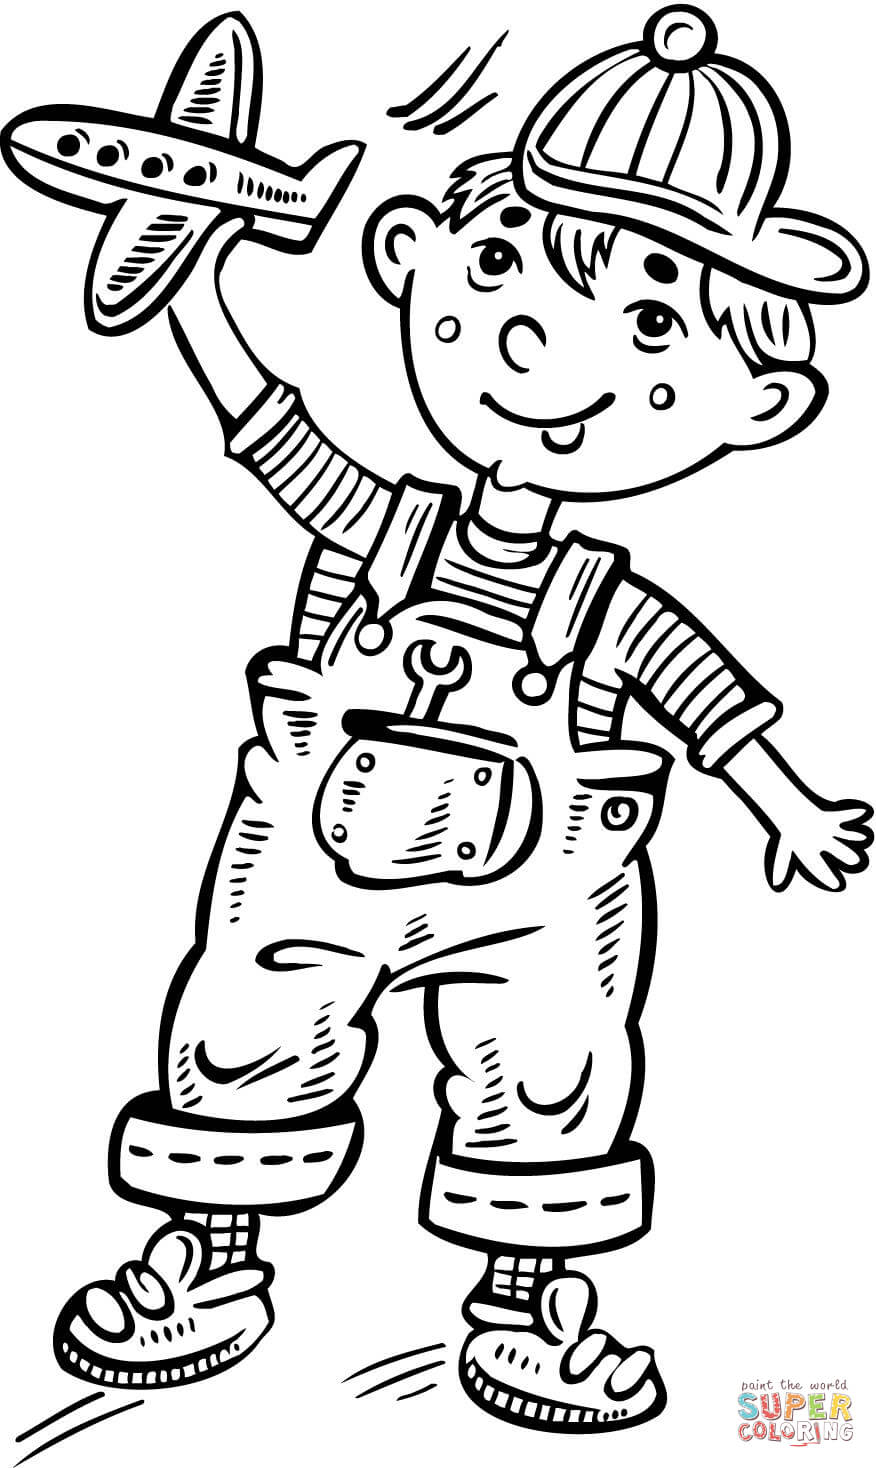 Little Boy Coloring Pages Printable Little Boy Playing With A Toy Plane Coloring Page Free Printable